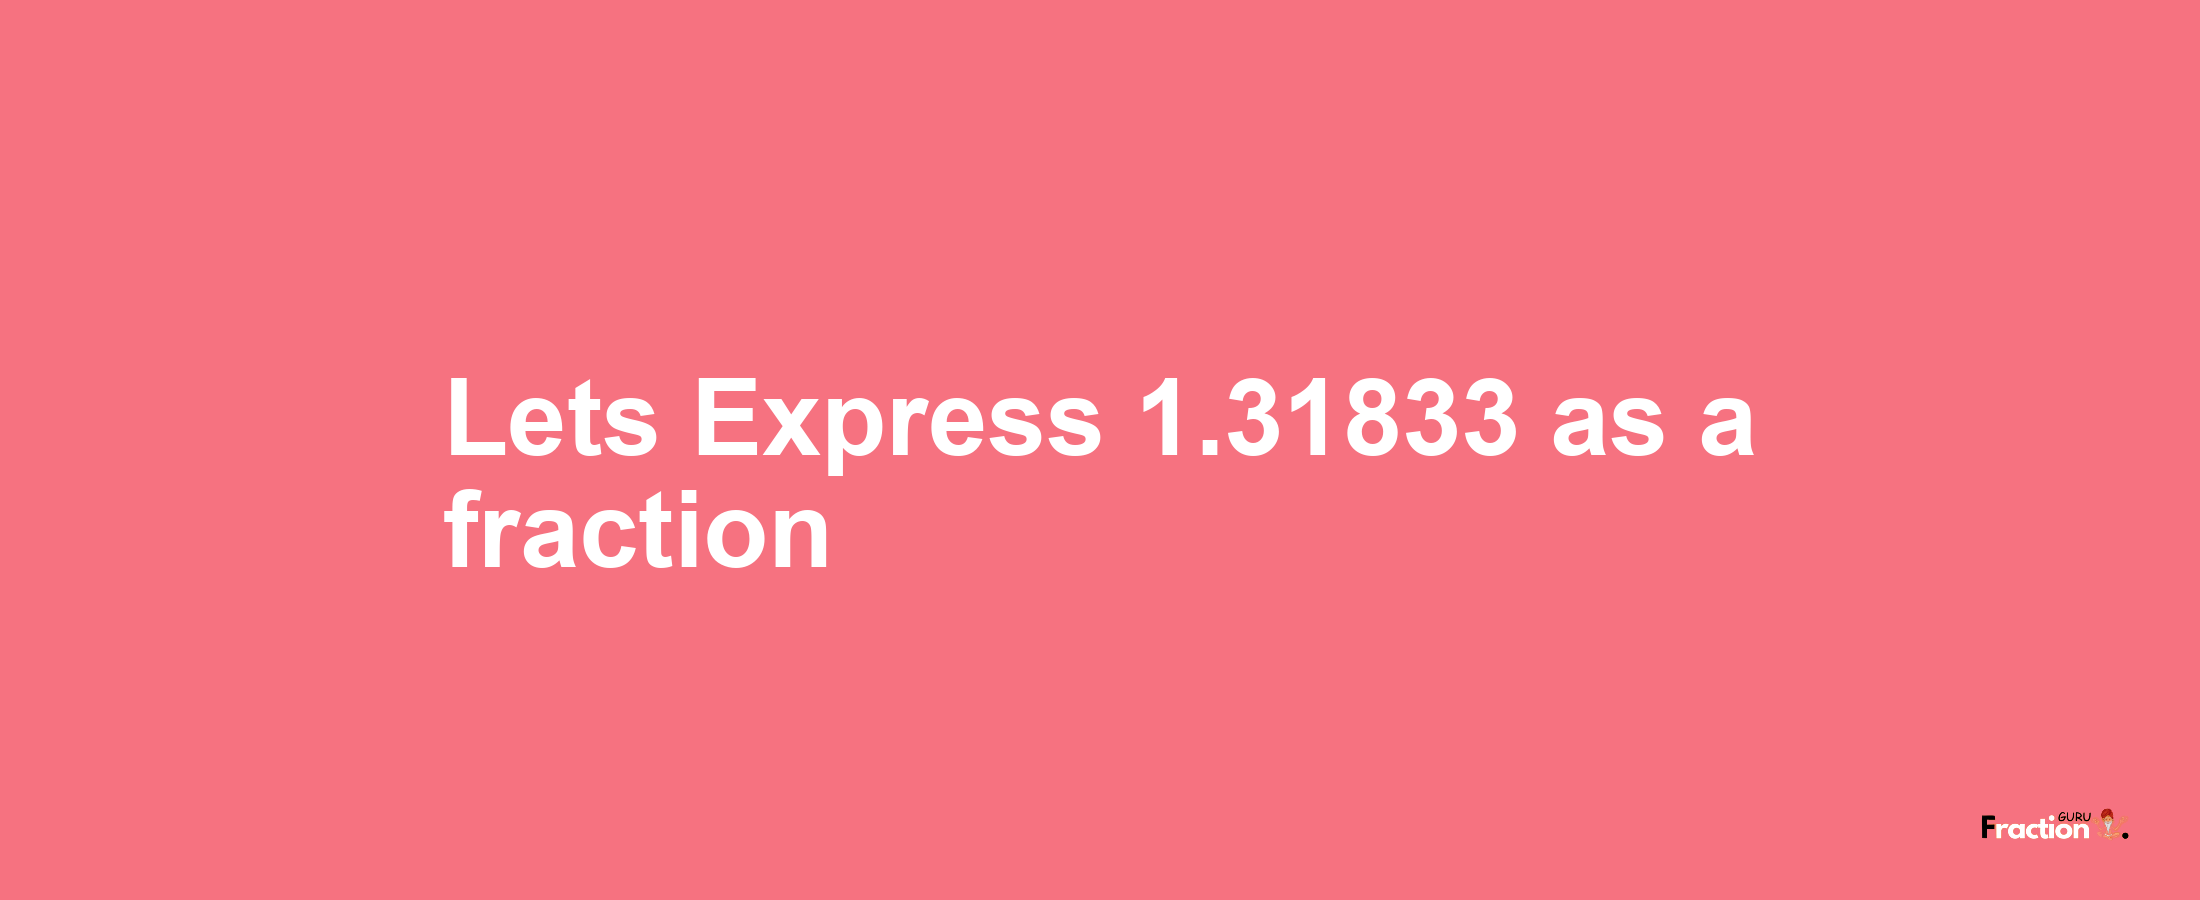 Lets Express 1.31833 as afraction